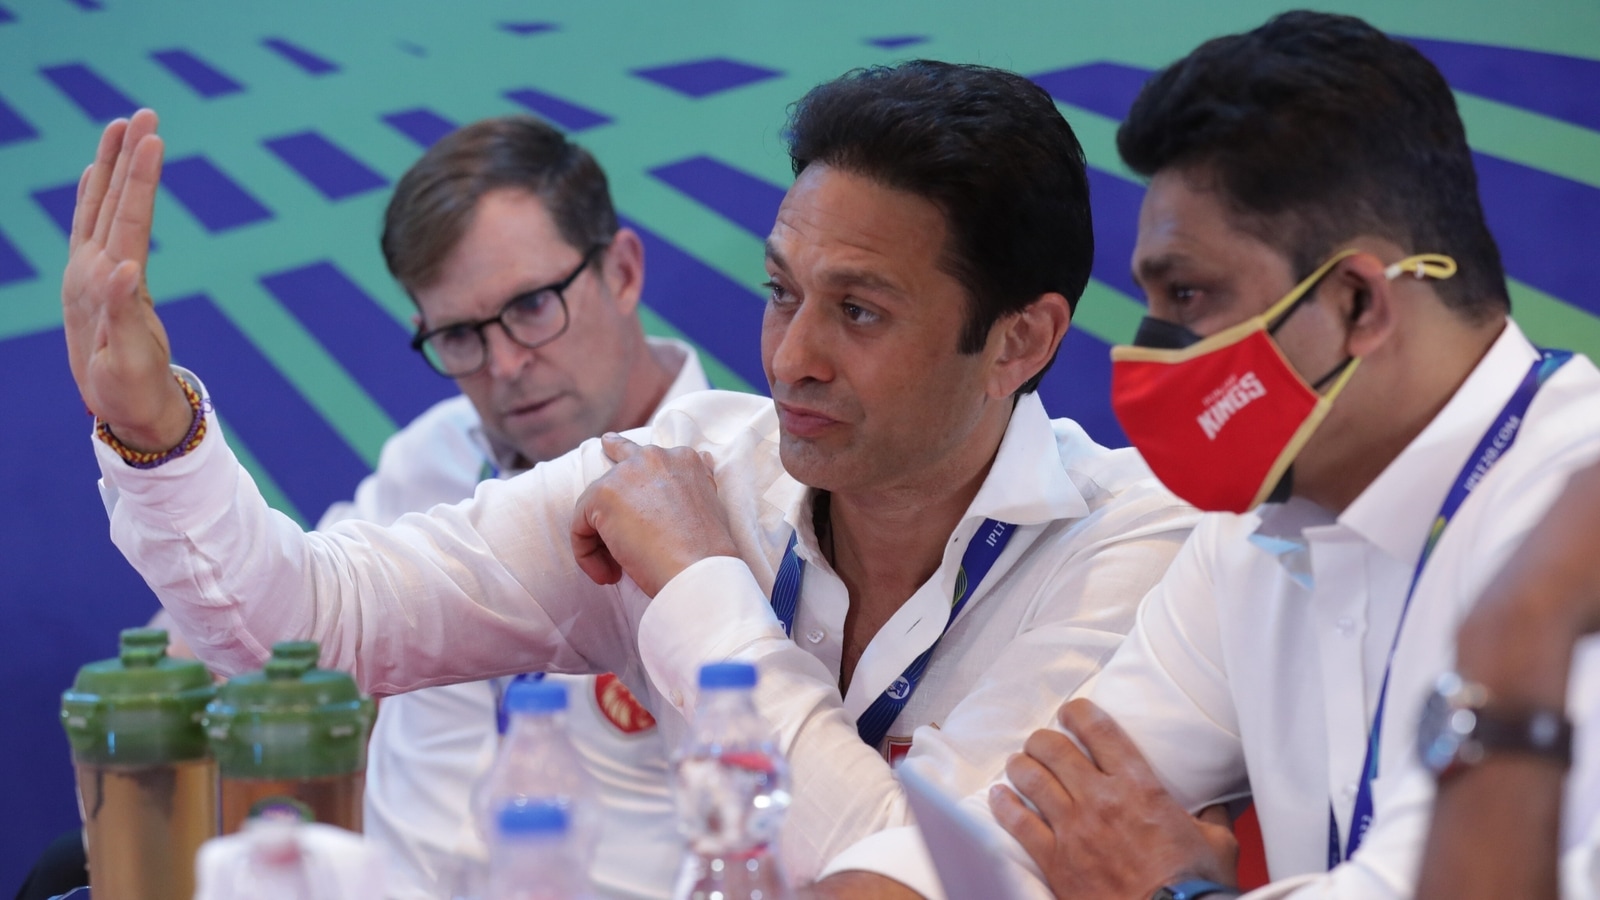 IPL 2023: Punjab Kings owner Ness Wadia offers UNIQUE solution to longer IPL window, says 'Conduct IPL in two halves'